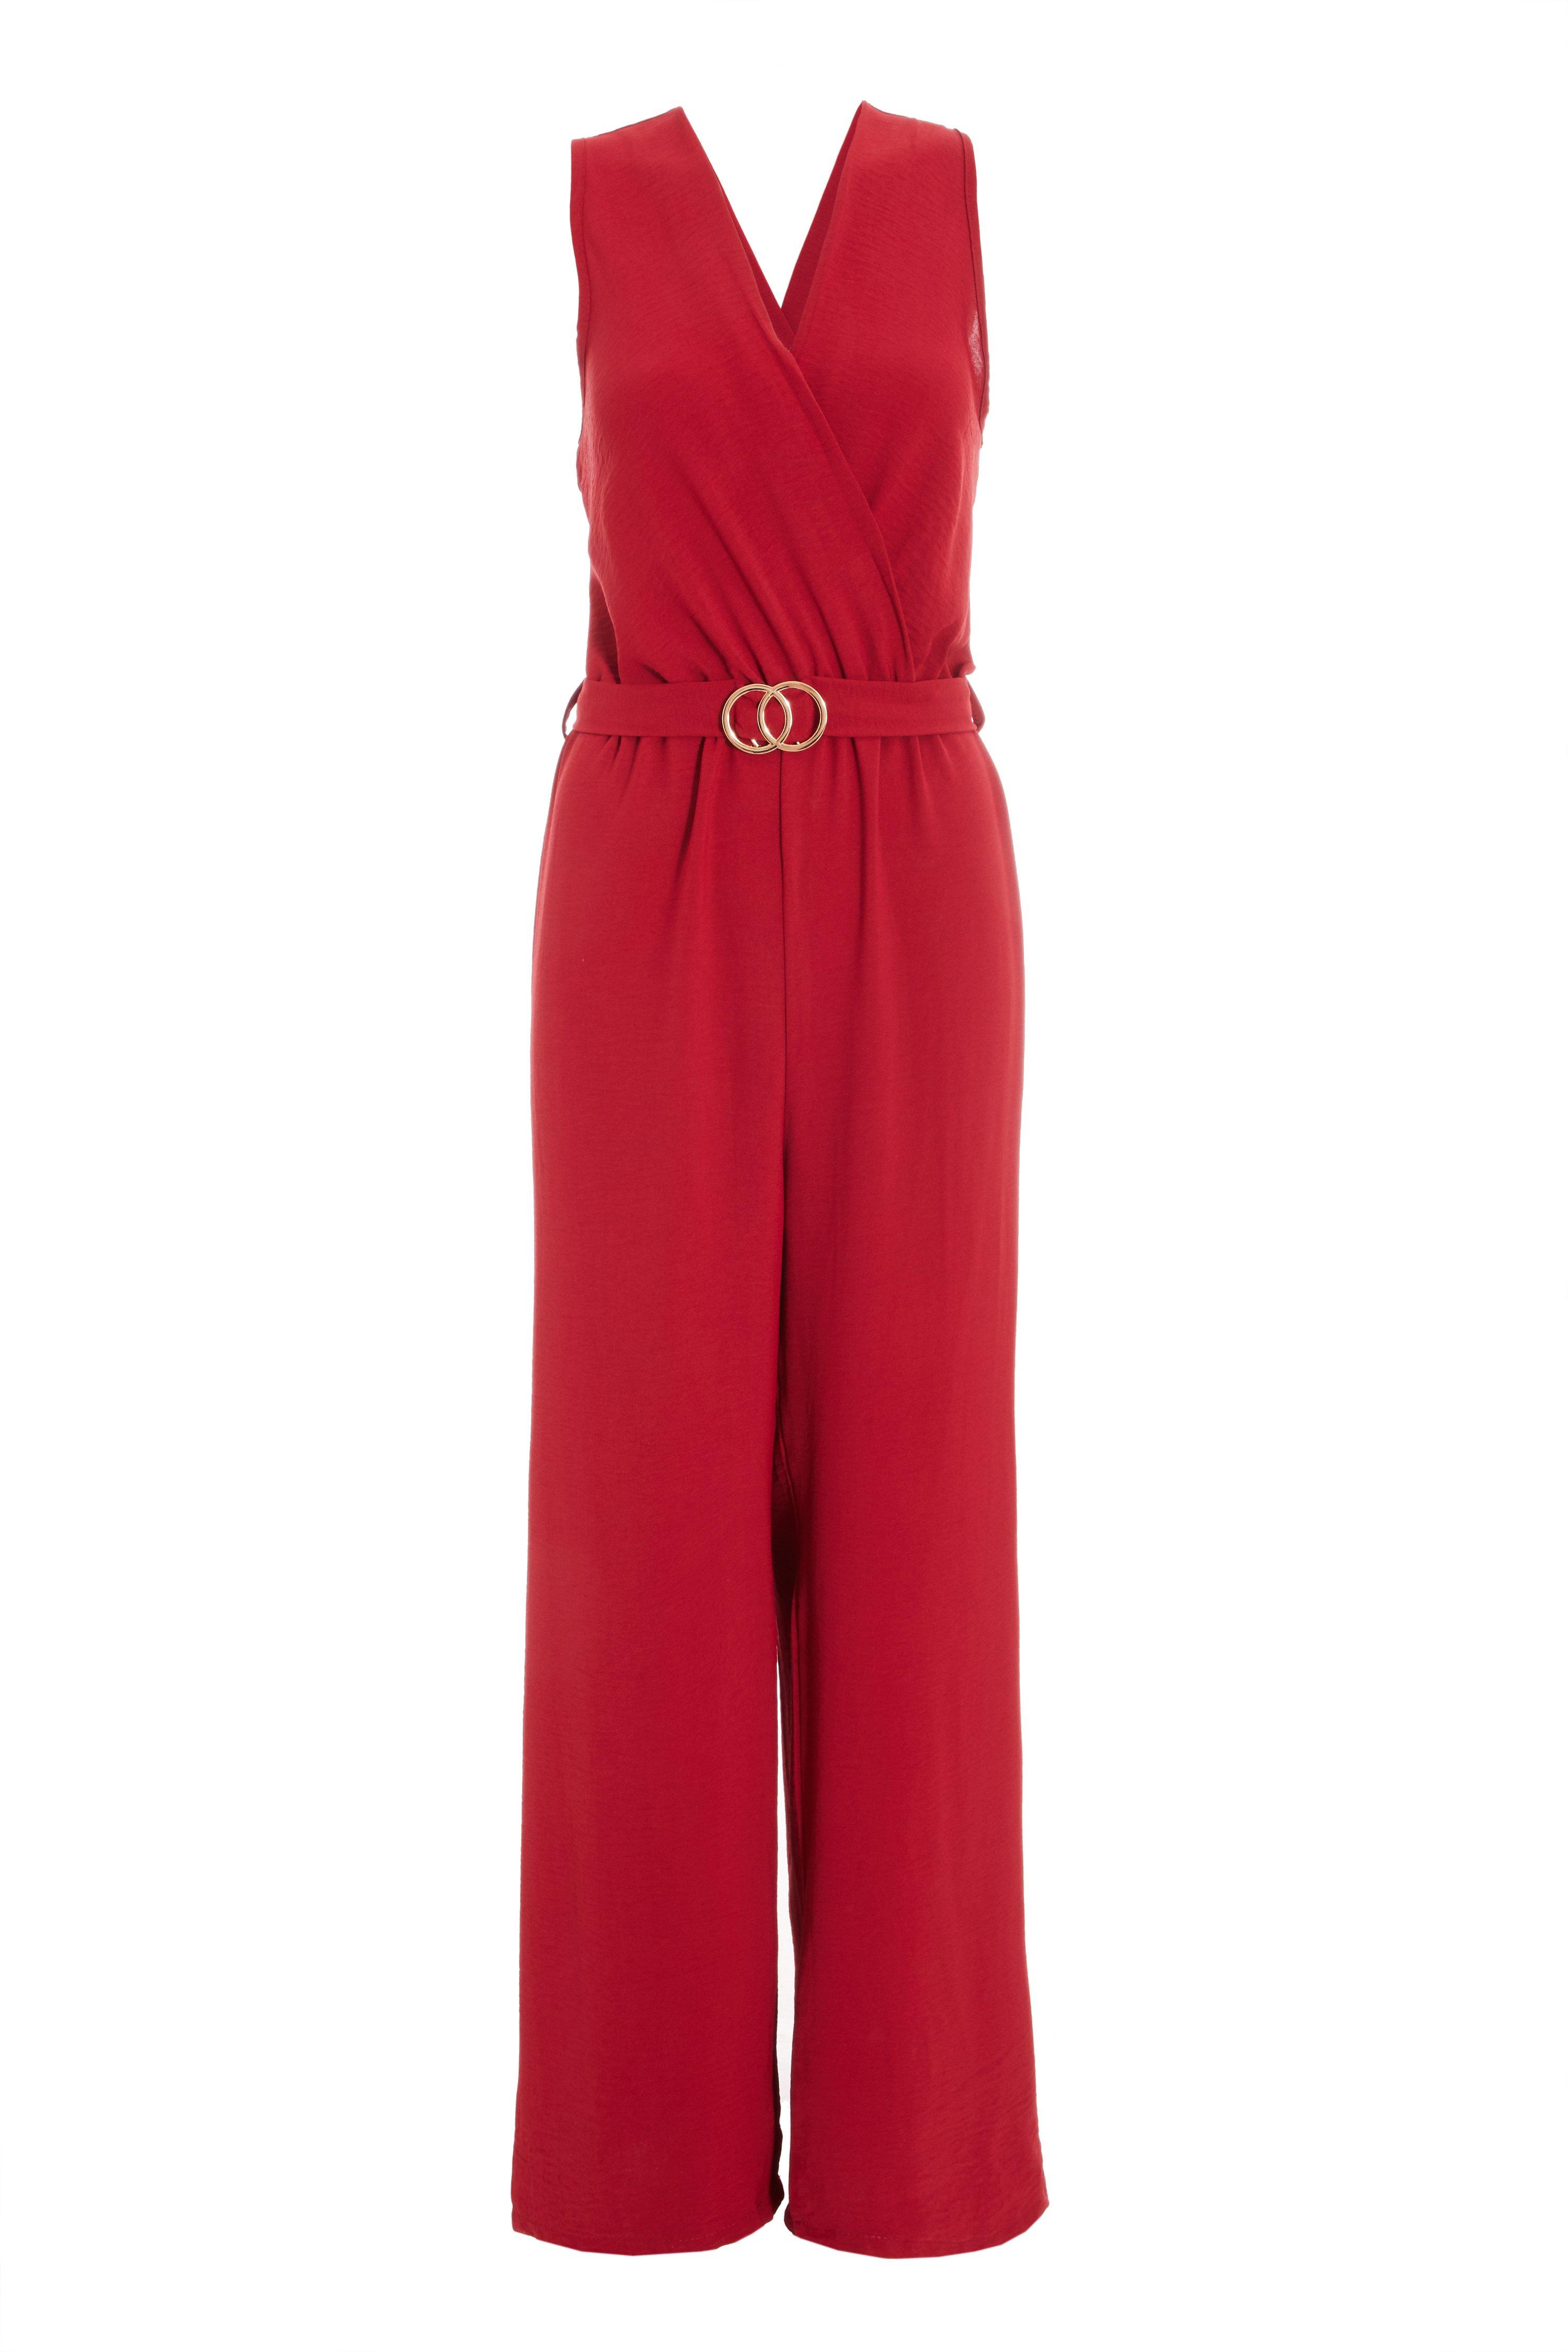 Berry Buckle Palazzo Jumpsuit - Quiz Clothing